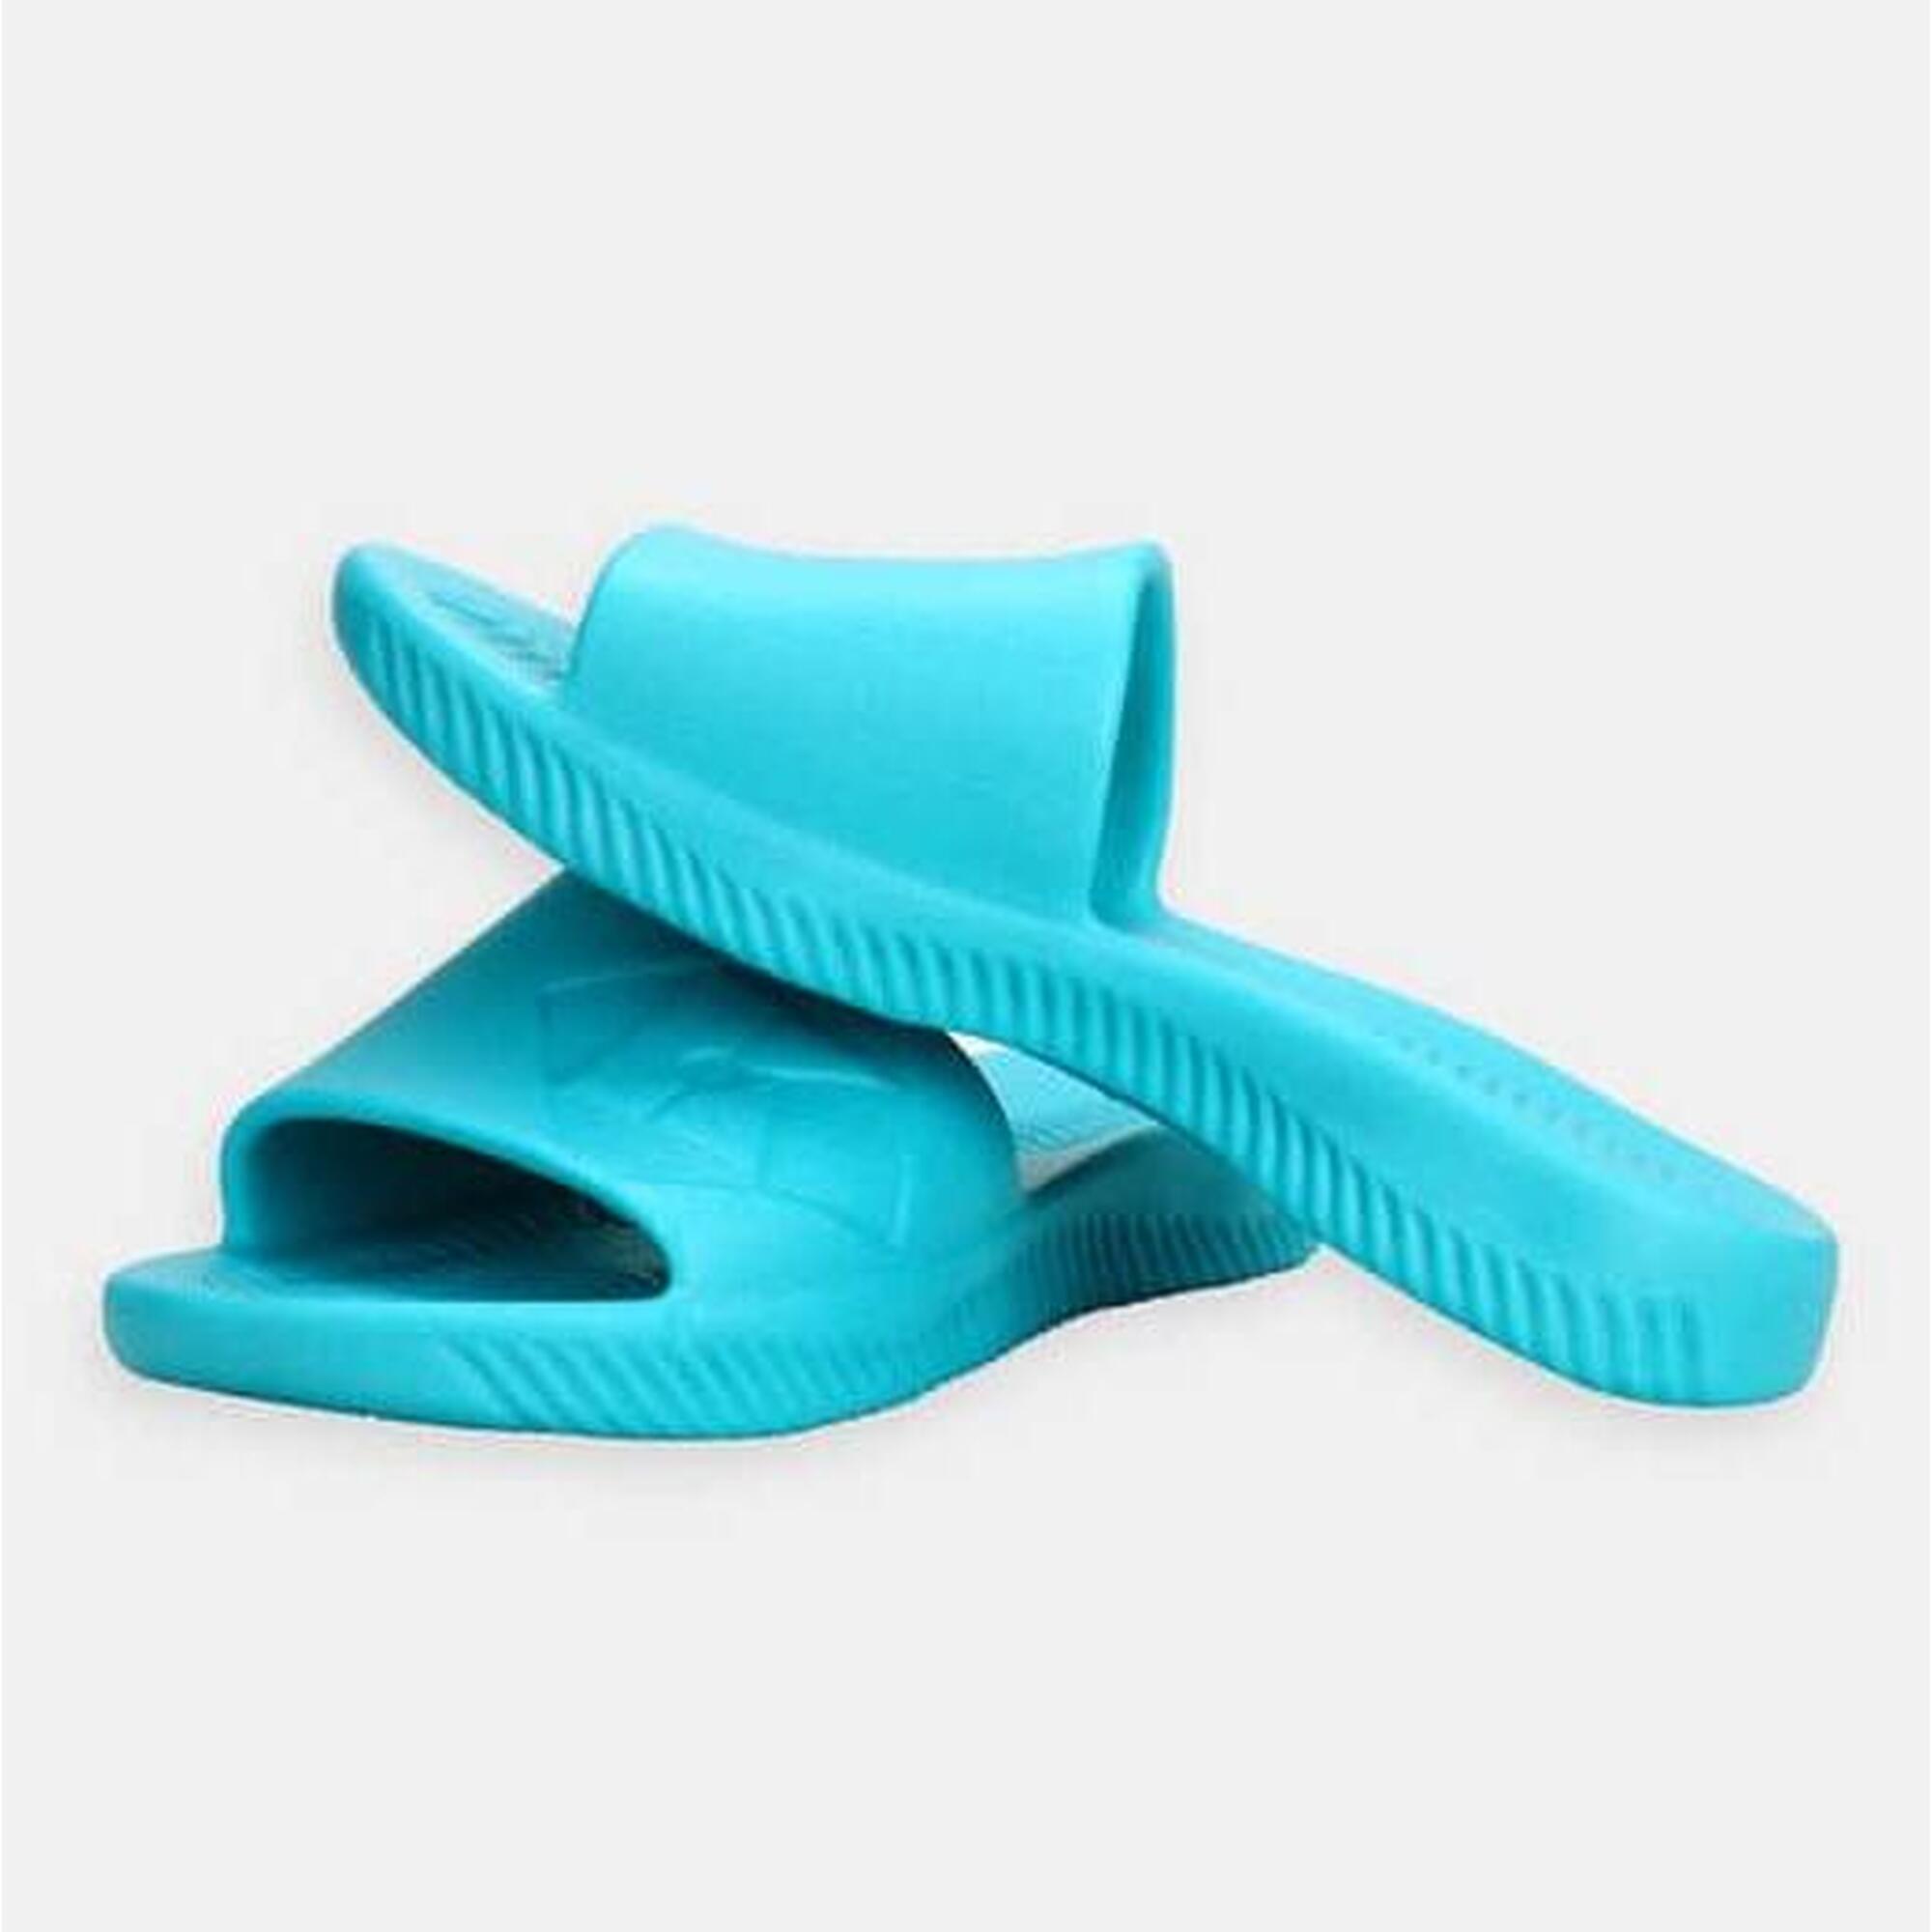 (Preorder) KHS-E01 Adult Unisex Swimming Slippers - Blue